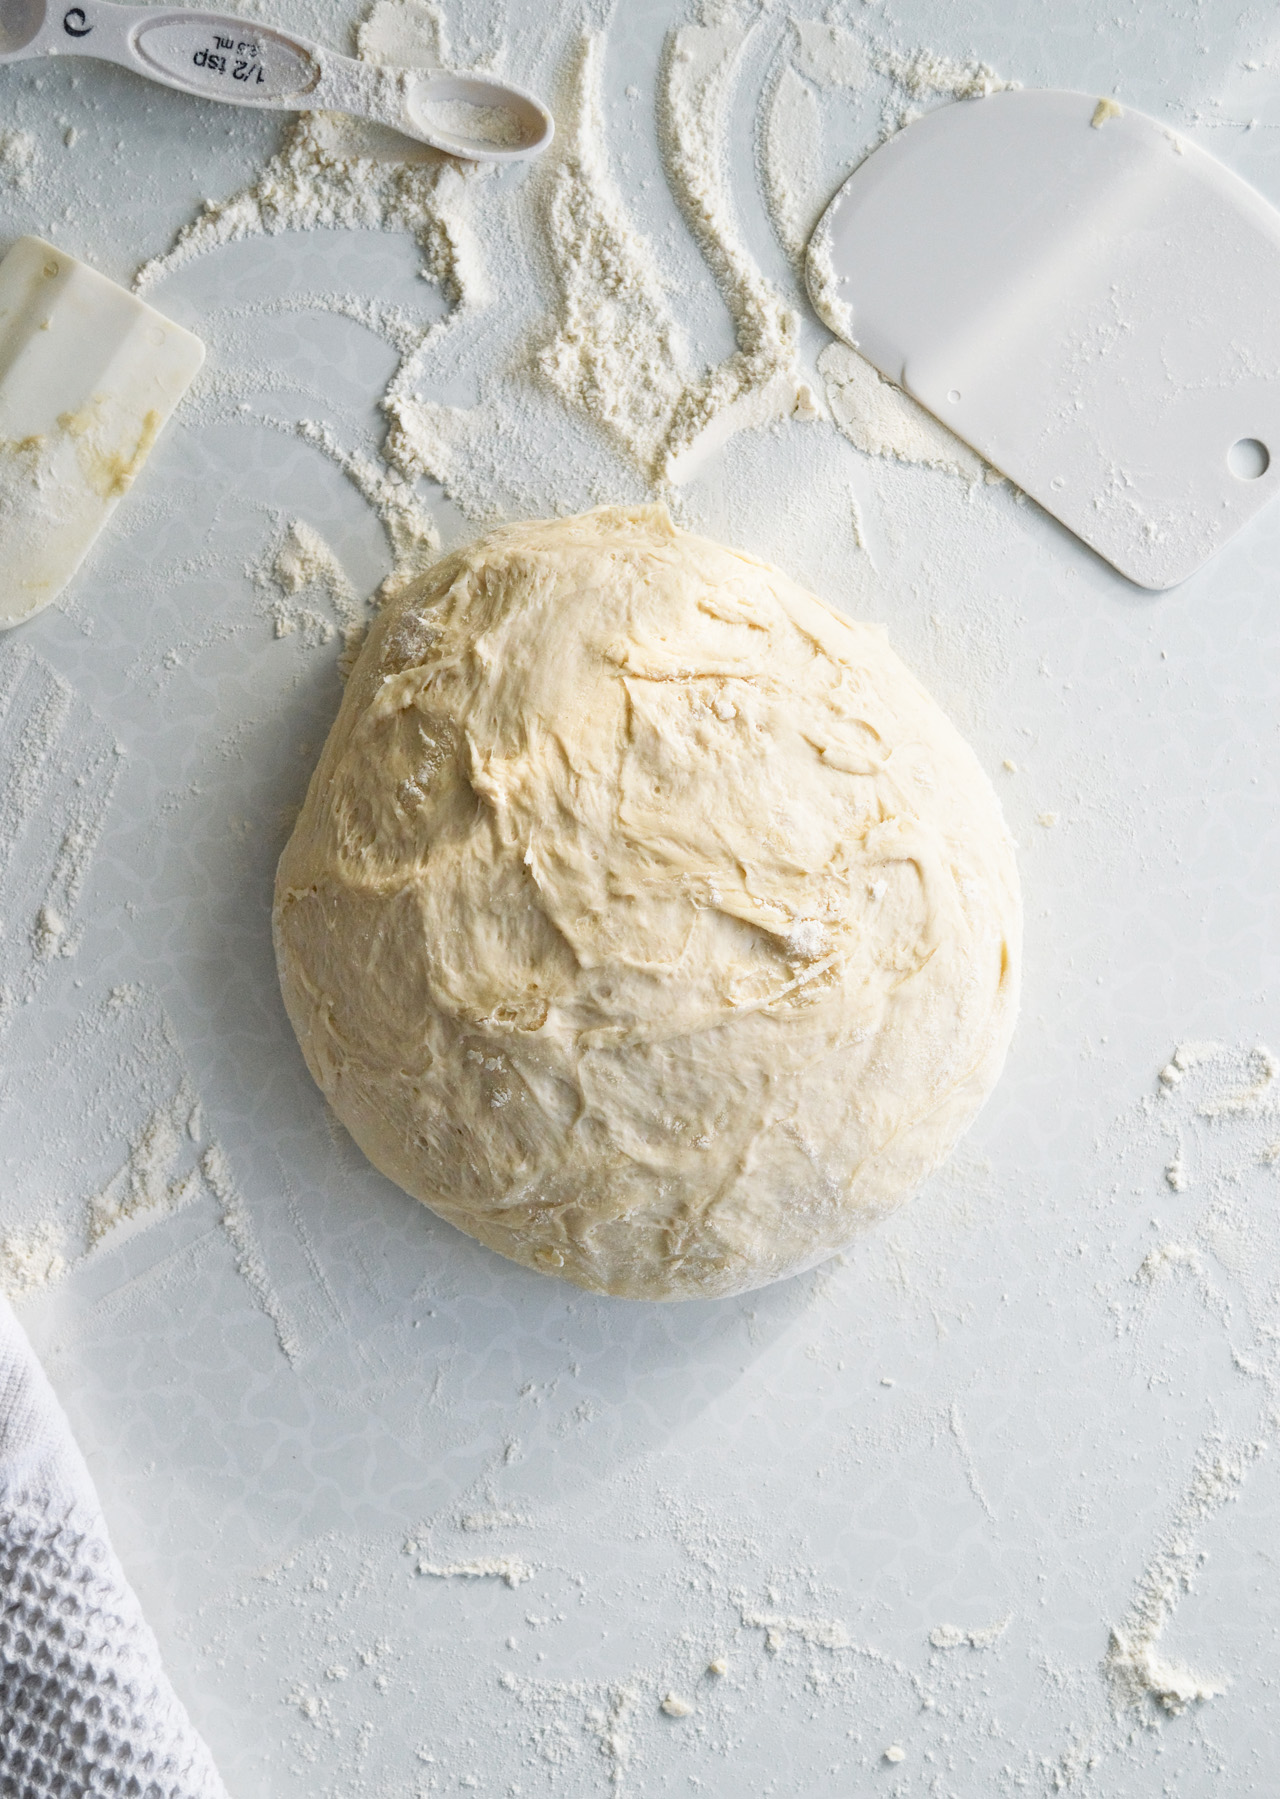 Recipe for the best easy pizza dough made with sunflower oil which gives it incredible flavor! Make and eat that pizza in 1 hour!